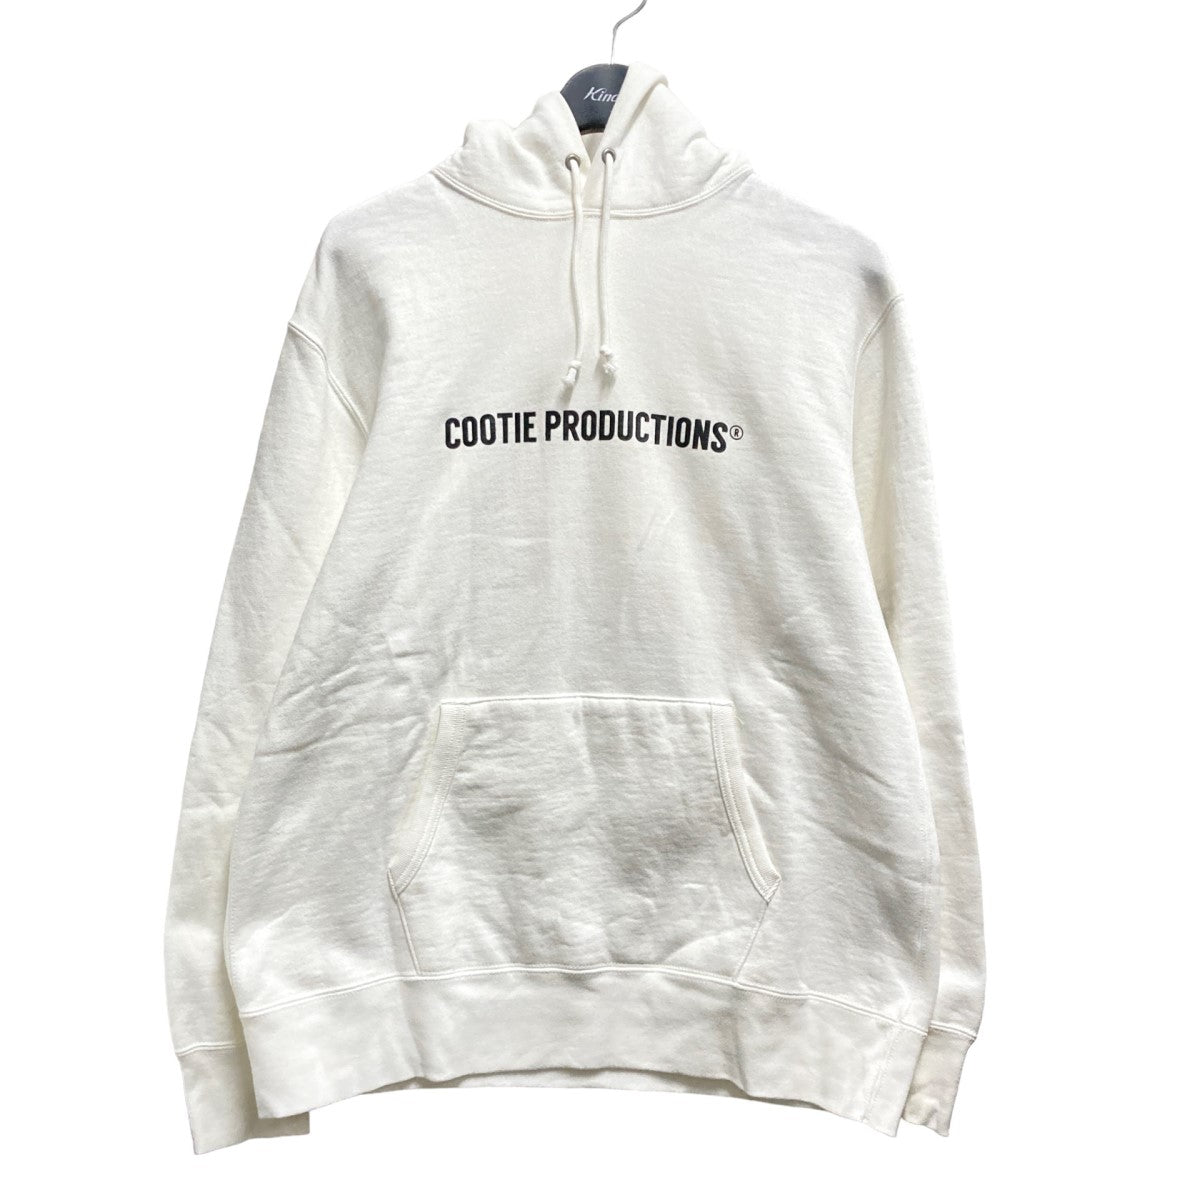 COOTIE PRODUCTIONS(クーティープロダクションズ) Print Pullover ...